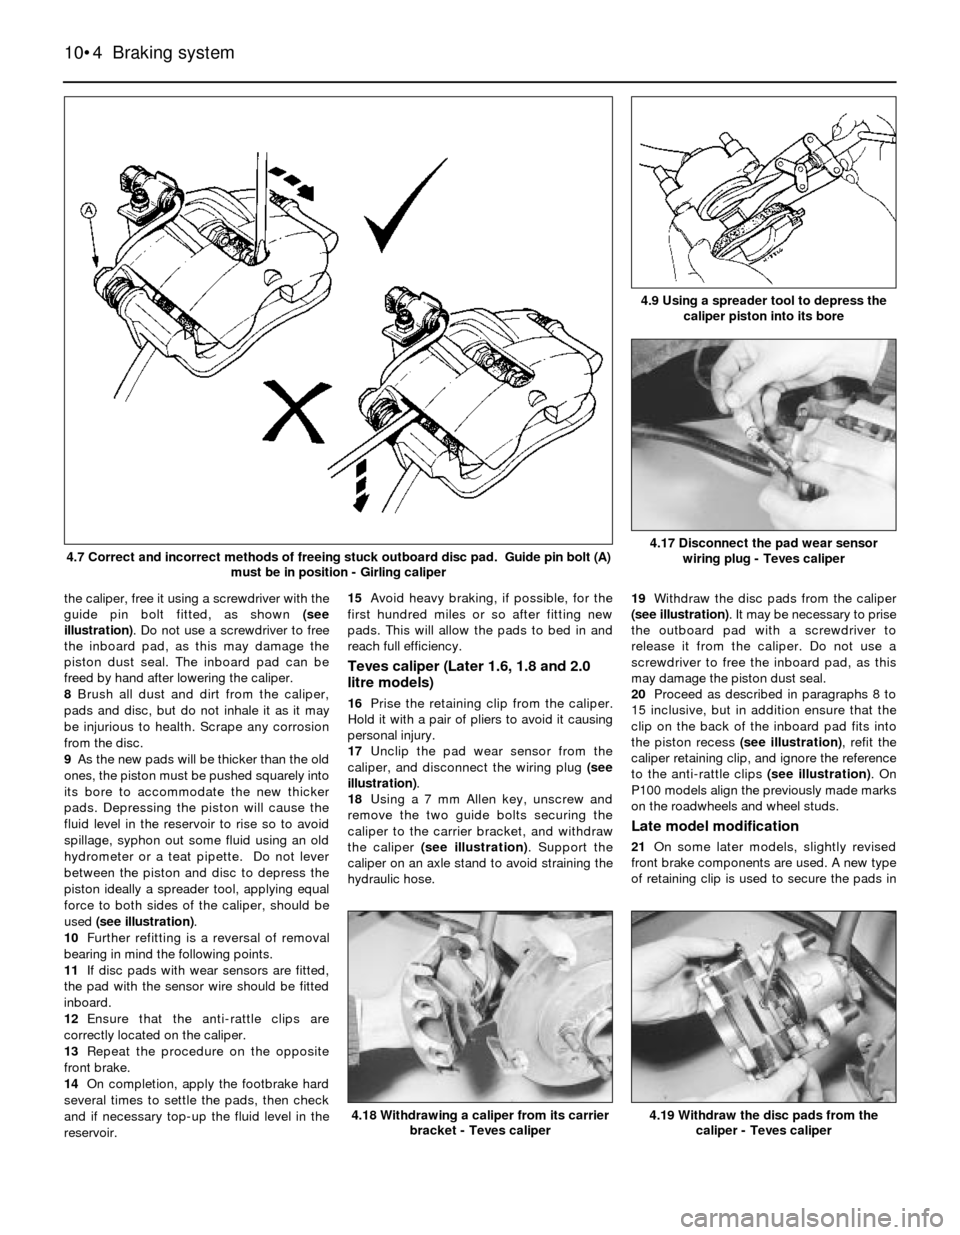 FORD SIERRA 1993 2.G Braking System Workshop Manual the caliper, free it using a screwdriver with the
guide pin bolt fitted, as shown (see
illustration). Do not use a screwdriver to free
the inboard pad, as this may damage the
piston dust seal. The inb